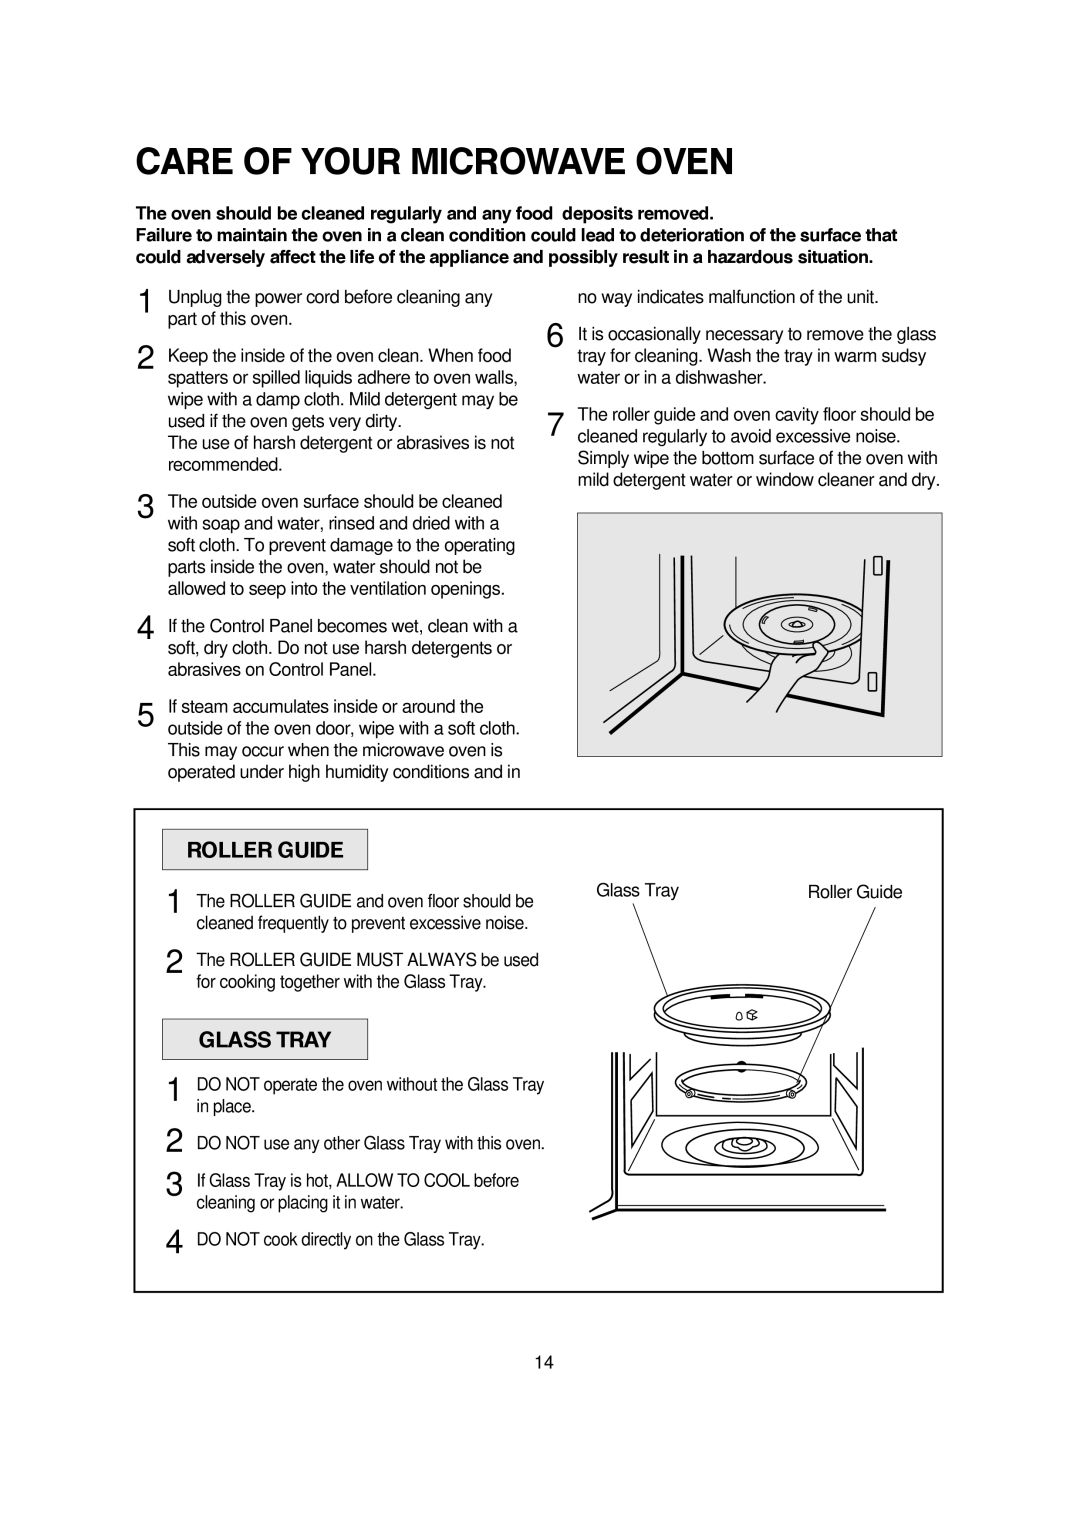 Magic Chef MCM770W/B instruction manual Care Of Your Microwave Oven, Roller Guide, Glass Tray 